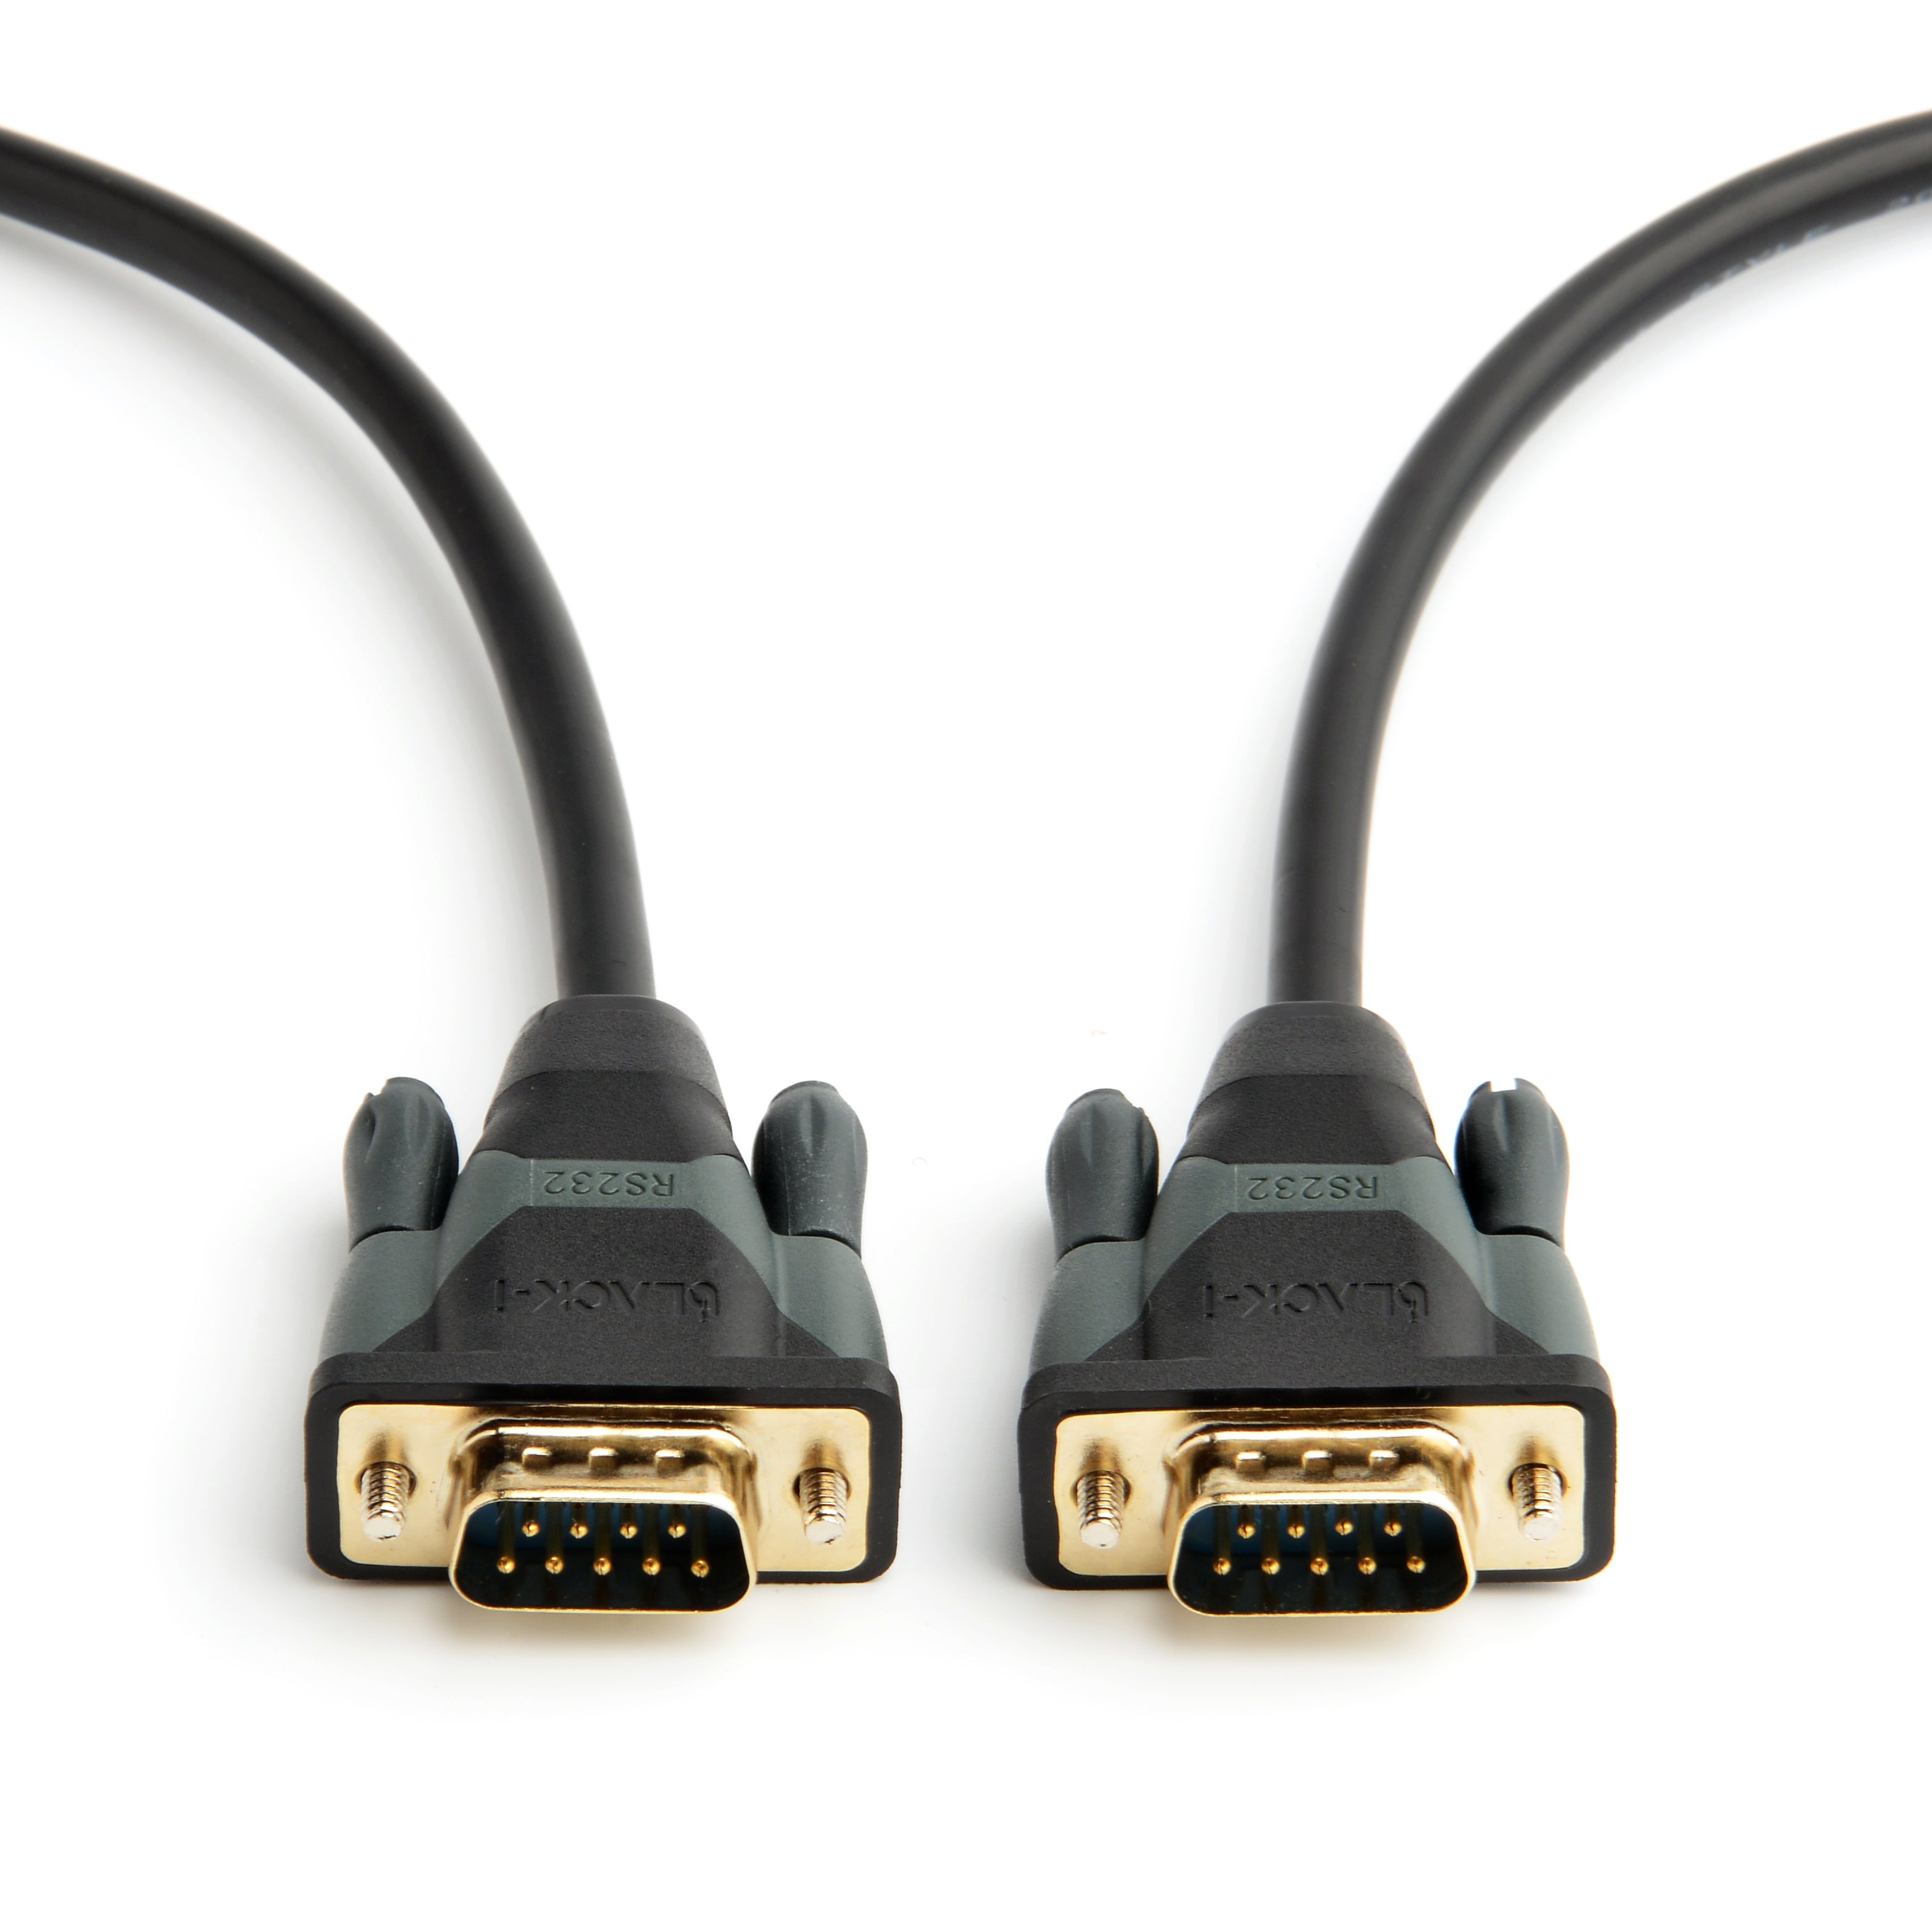 Black-i DB9 Serial Cable